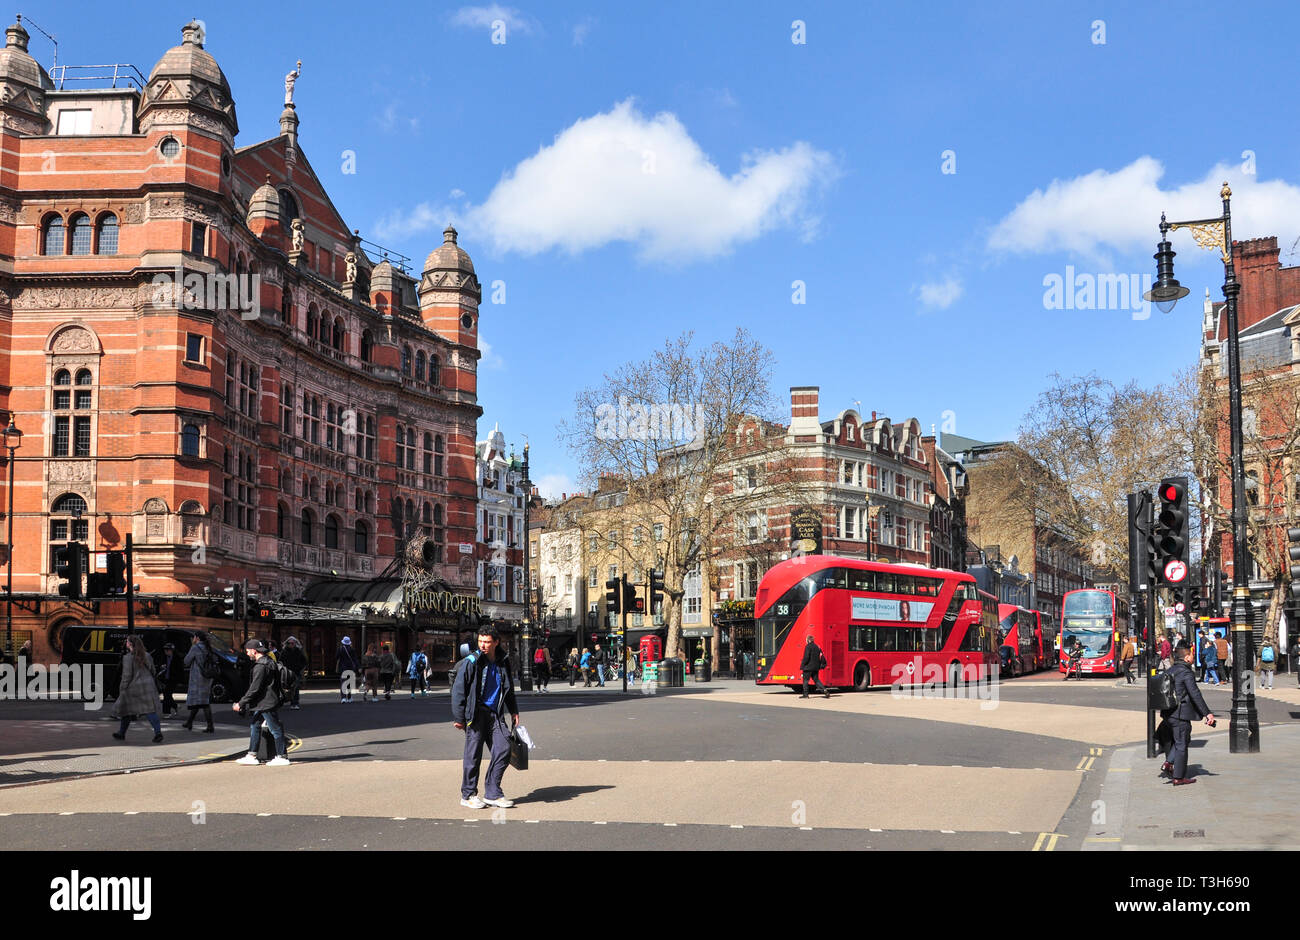 Cambridge Circus with Palace Theatre on left, Charing Cross Road, London, England, UK Stock Photo